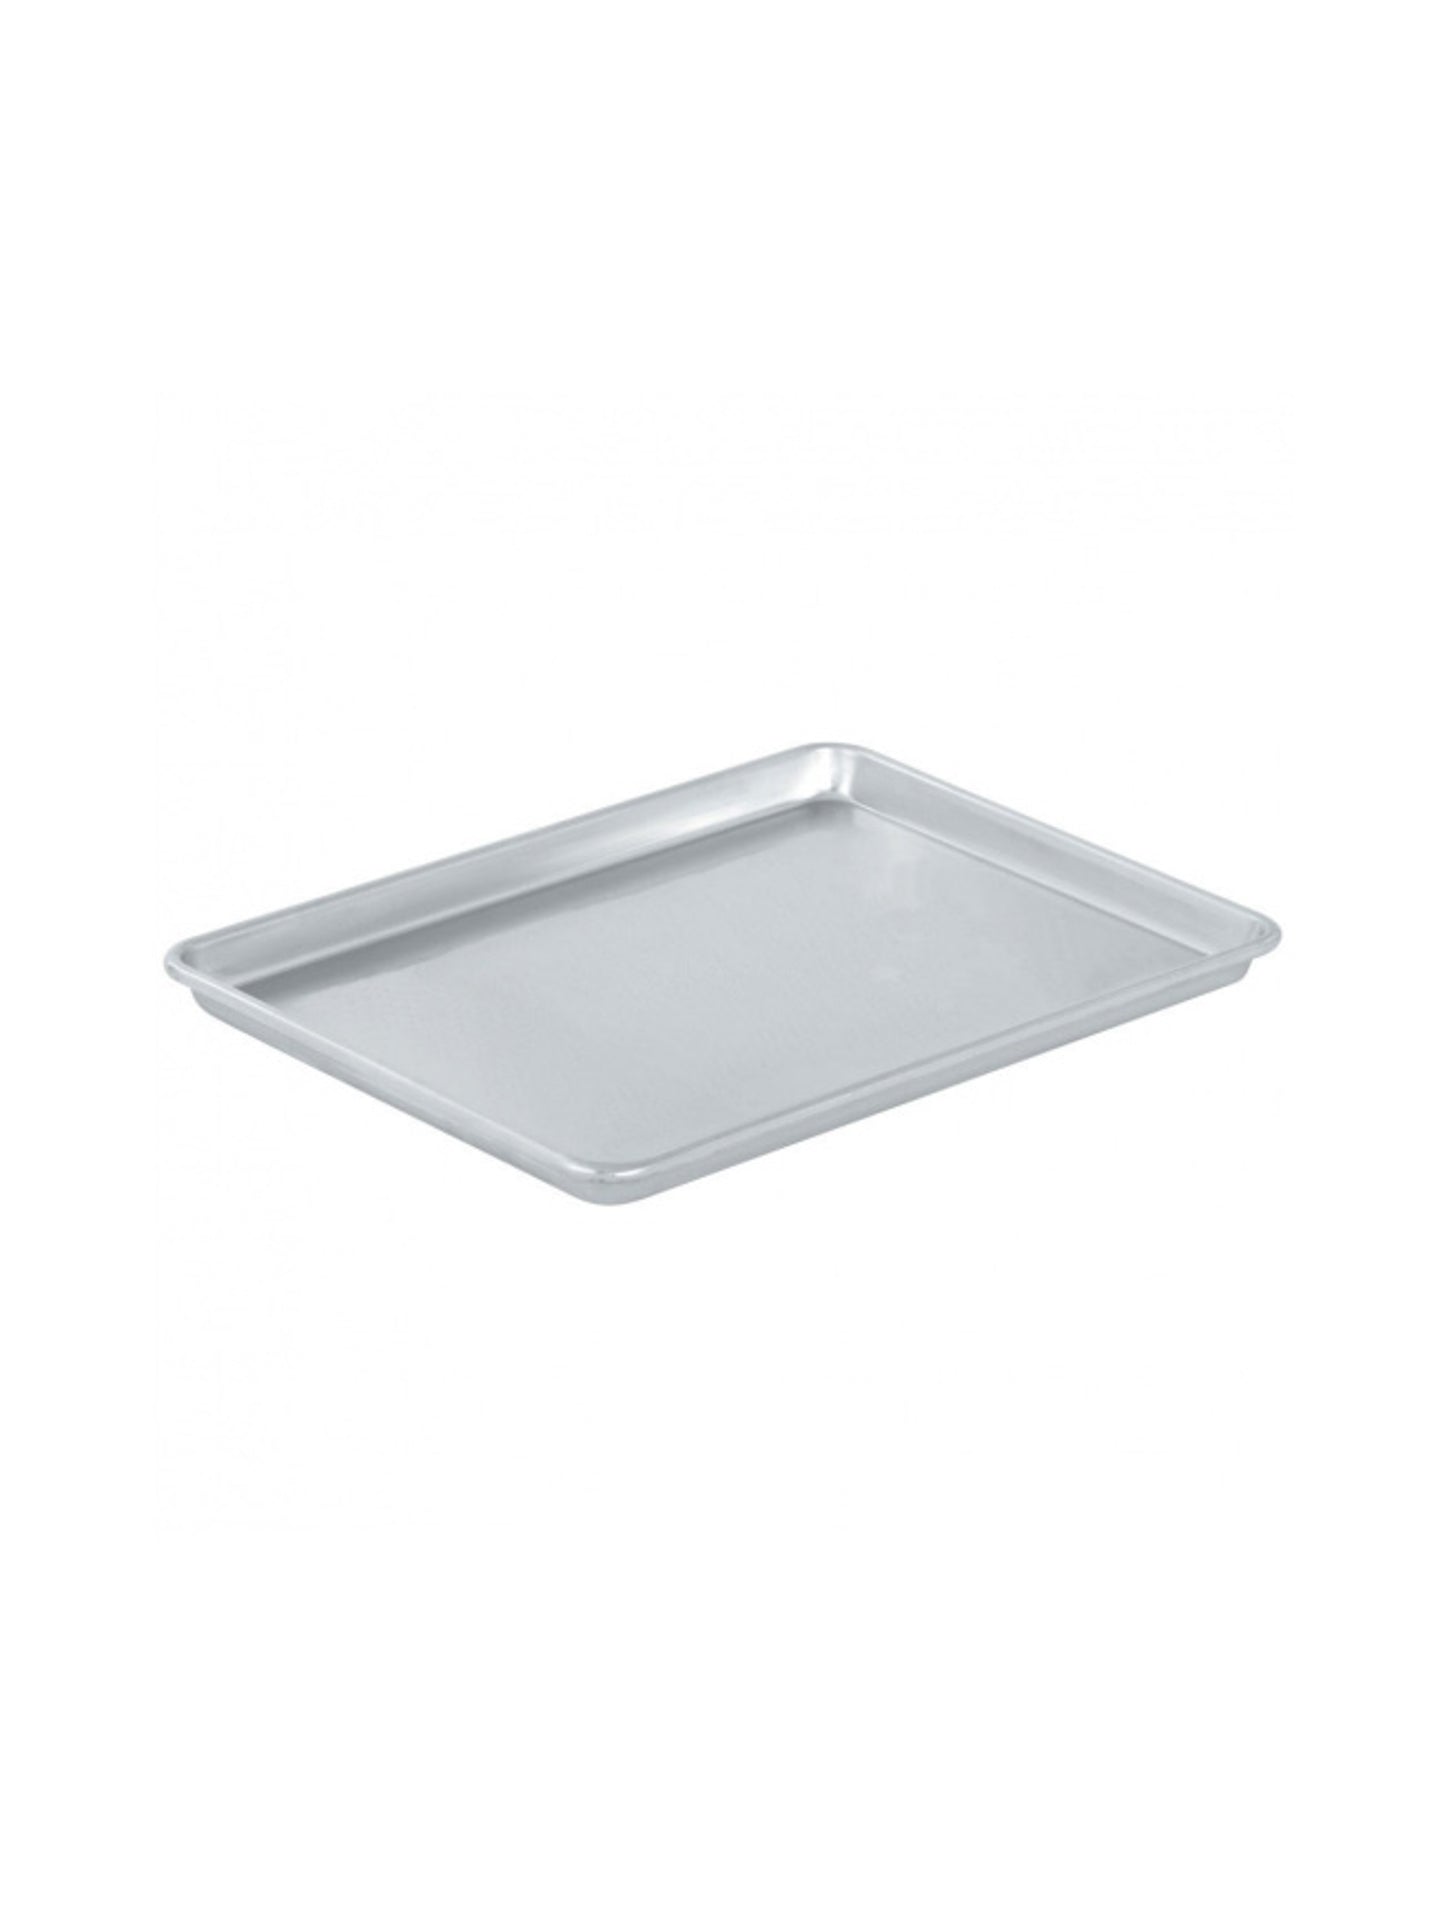 598835991203 ~ BEACON ~ 16x24 Baking Sheet Pan Commercial Grade - household  items - by owner - housewares sale 